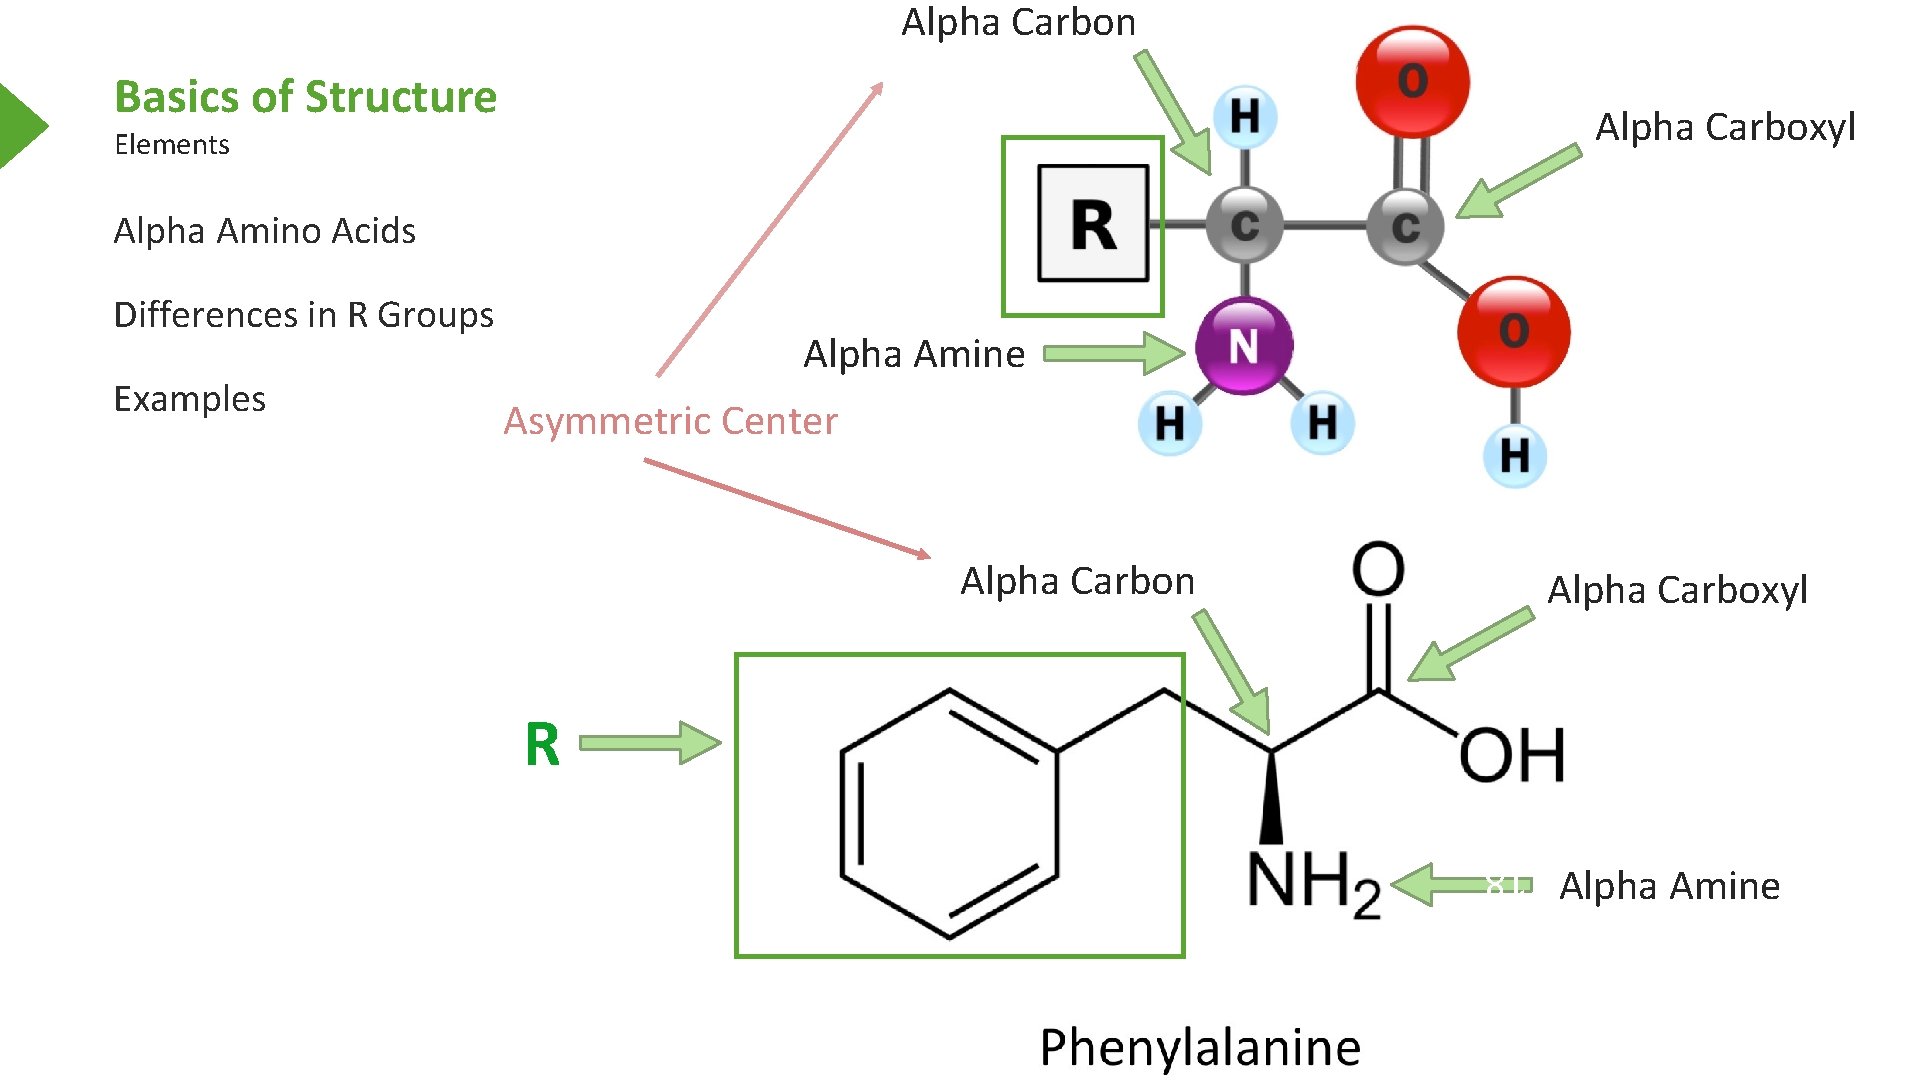 Alpha Carbon Basics of Structure Alpha Carboxyl Elements Alpha Amino Acids Differences in R